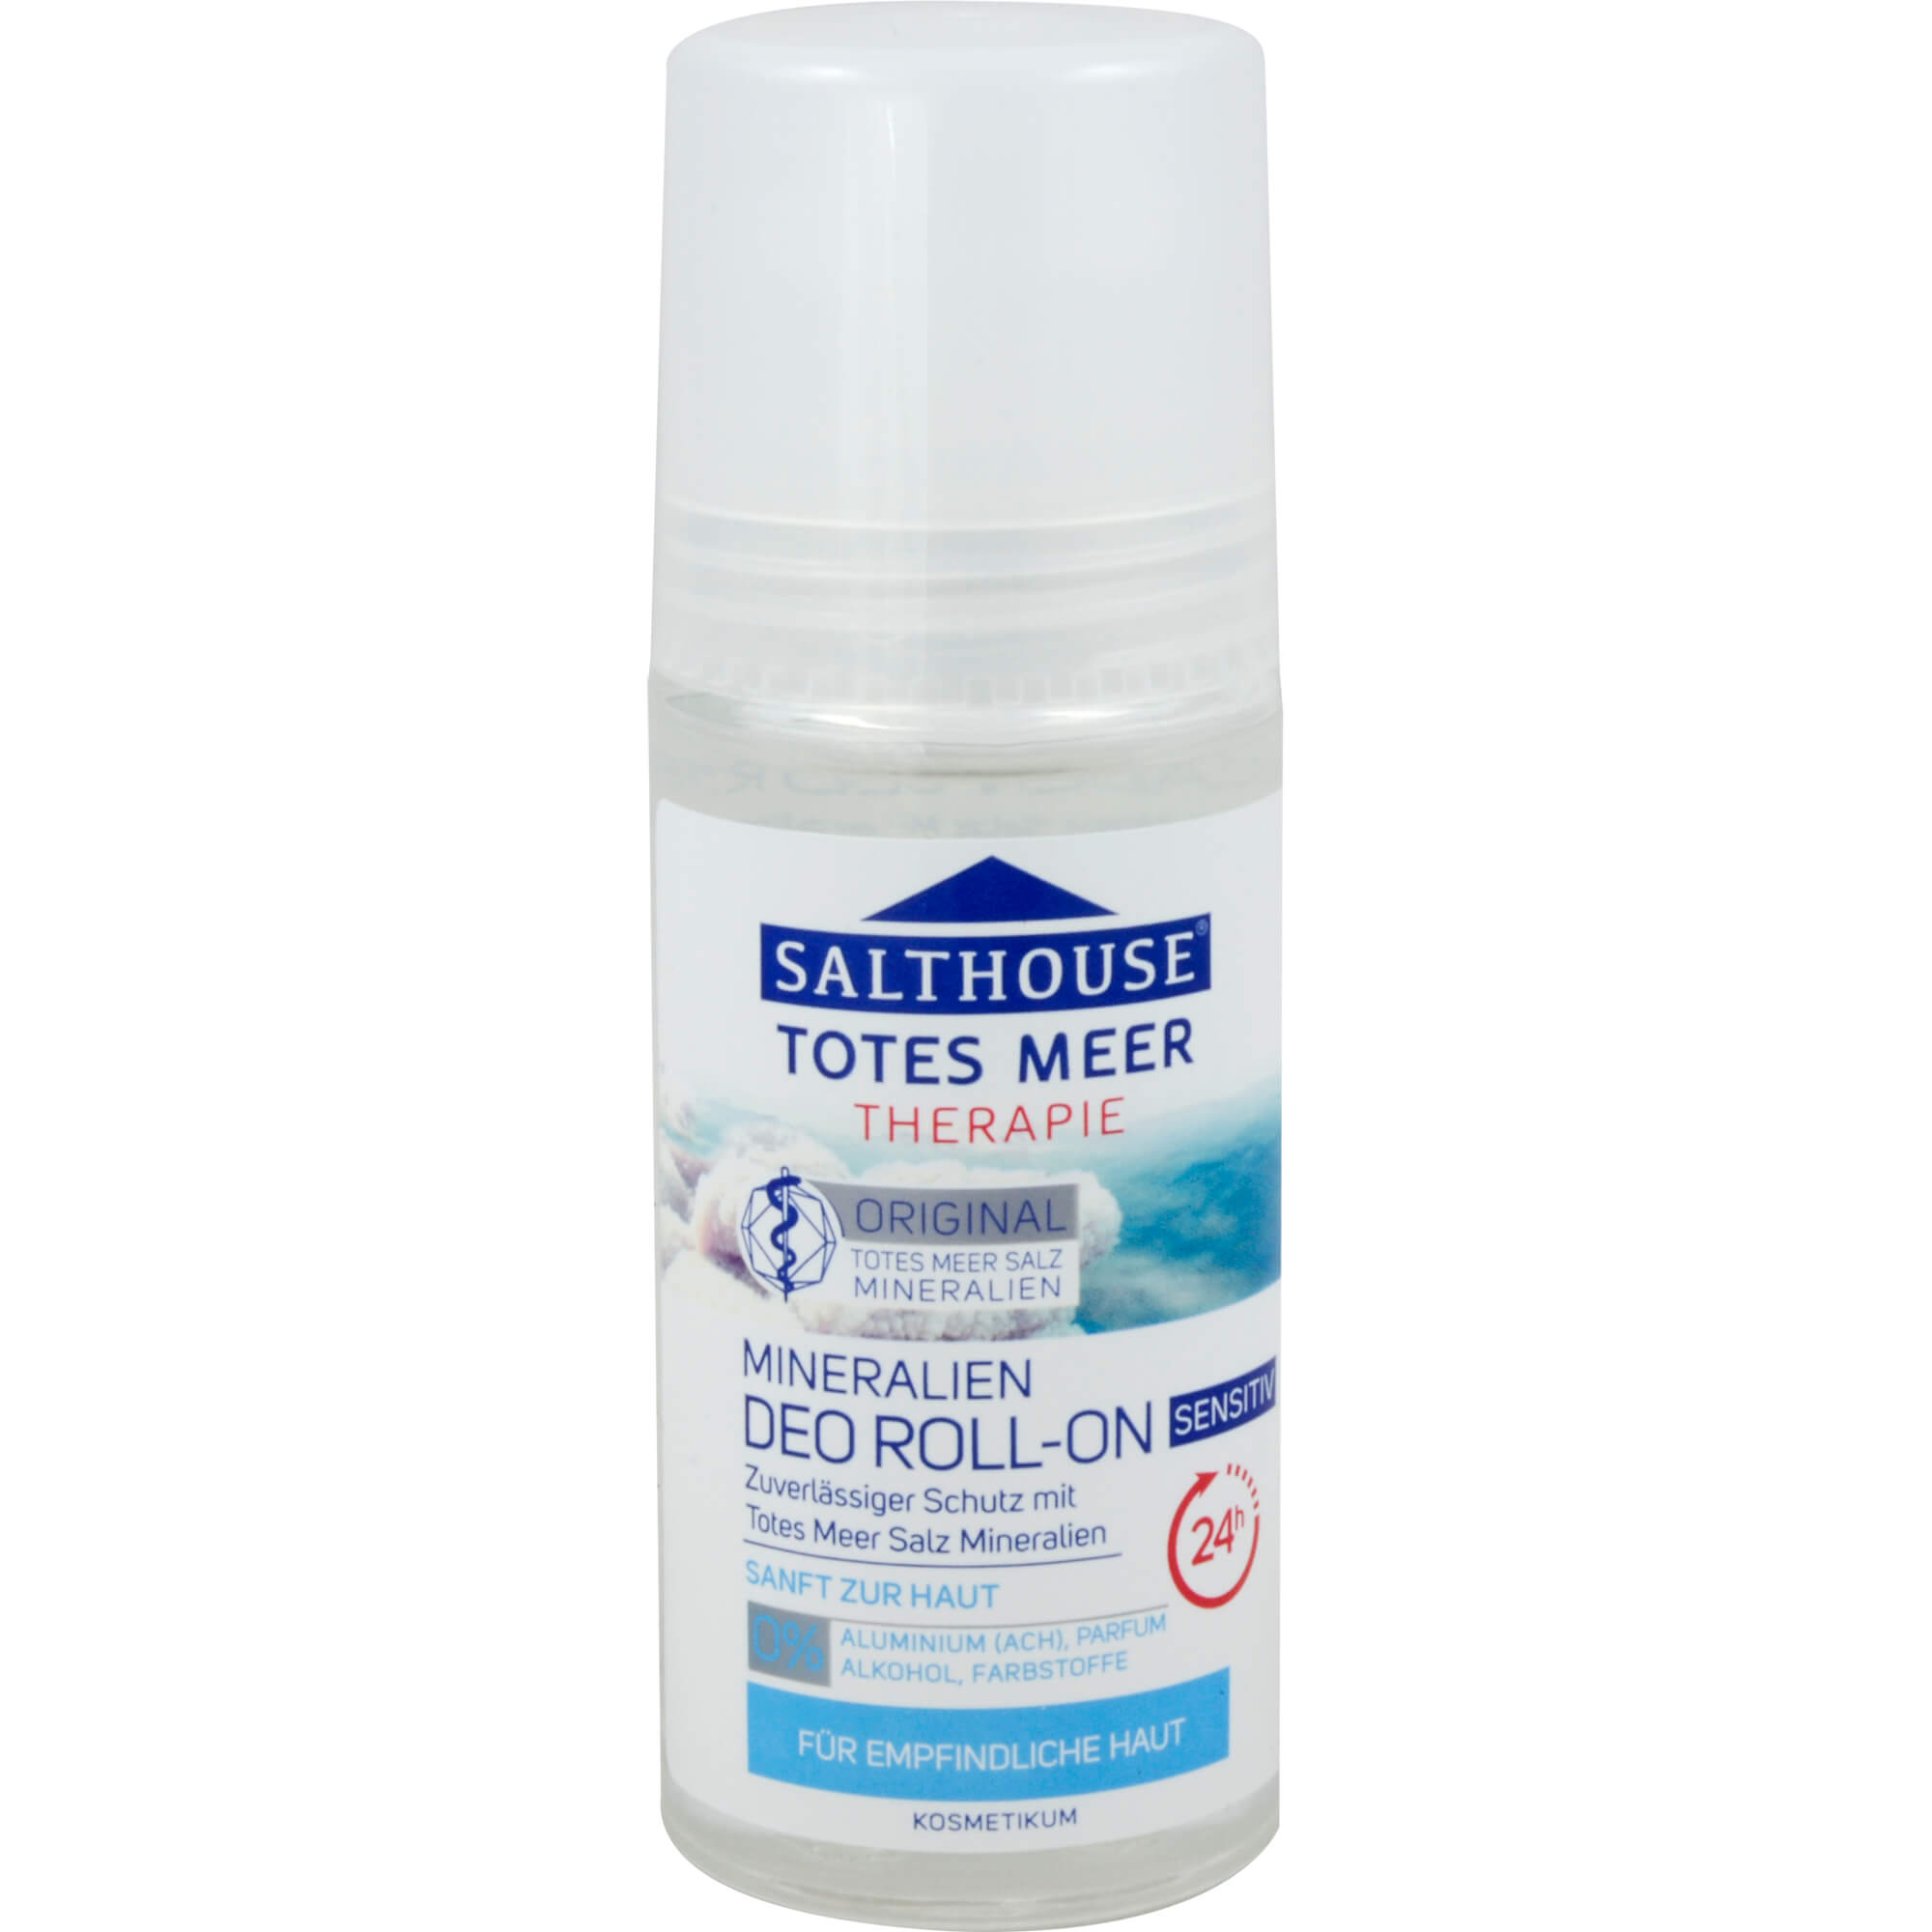 SALTHOUSE THERAPIE Deo Roll-on